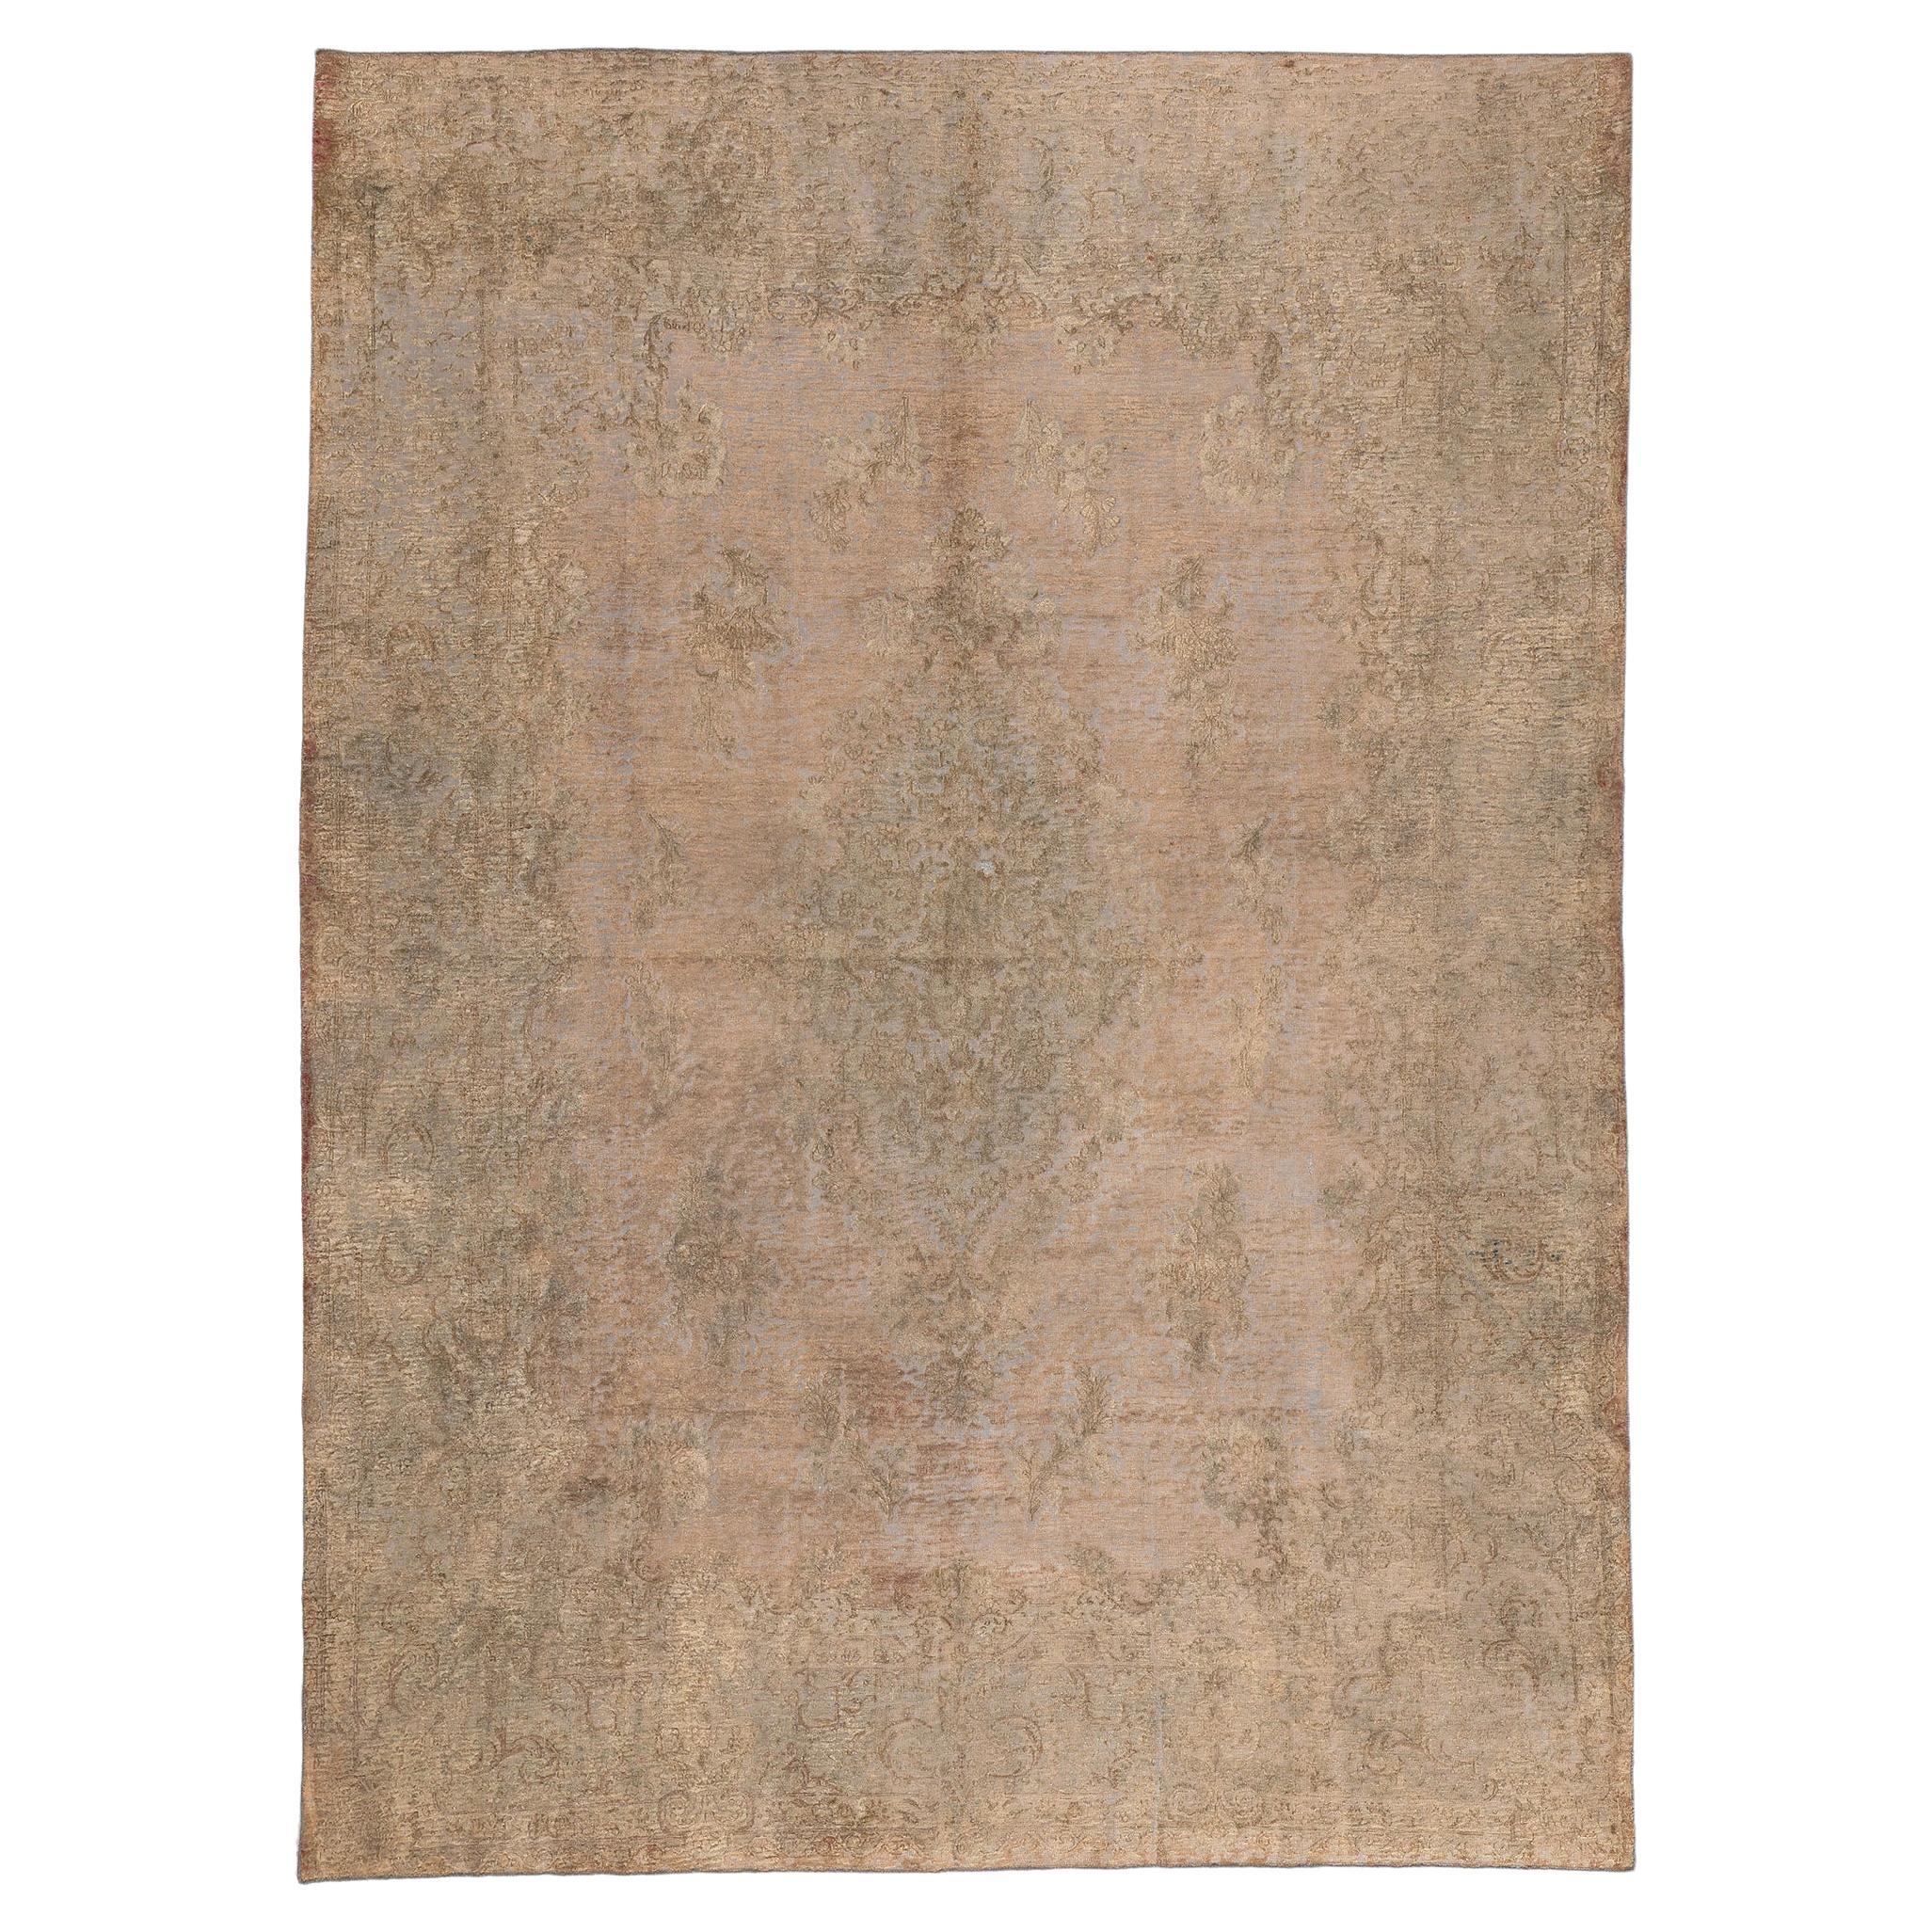 Earth-Tone Vintage Turkish Overdyed Rug, Belgian Chic Meets French Industrial